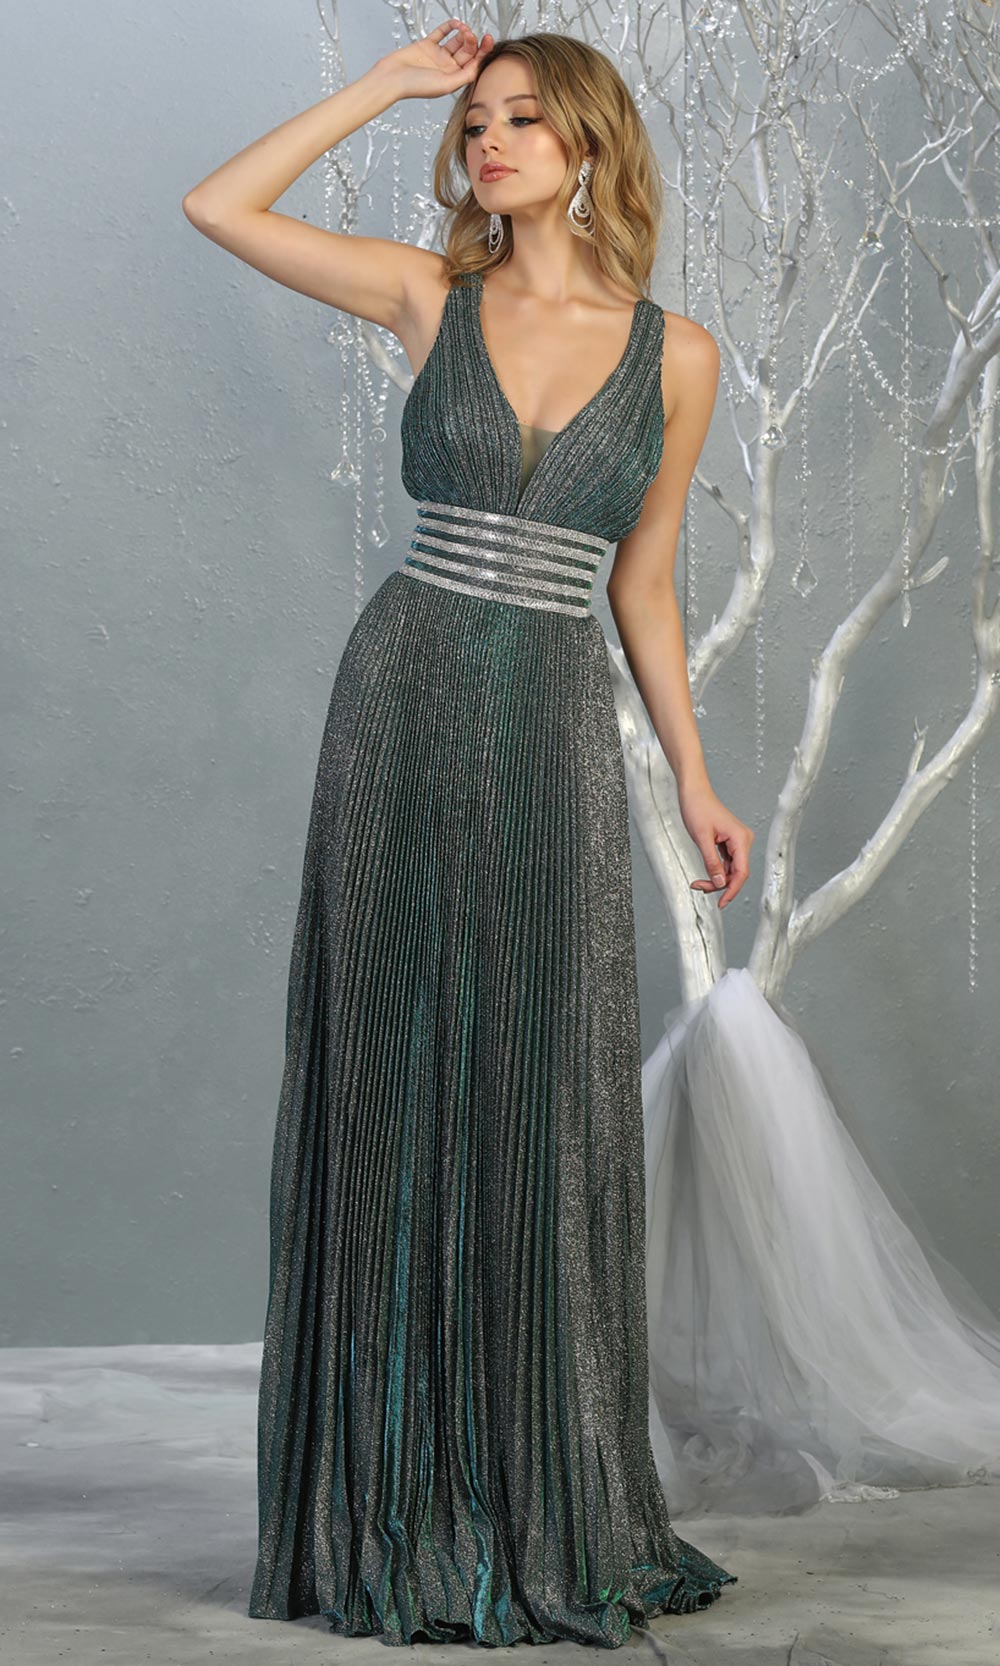 Mayqueen RQ7828 long v neck dark green evening dress w/ wide straps & pleated skirt. Full length dark green gown is perfect for  enagagement/e-shoot dress, formal wedding guest, evening party dress,prom, engagement, wedding reception. Plus sizes avail.jpg